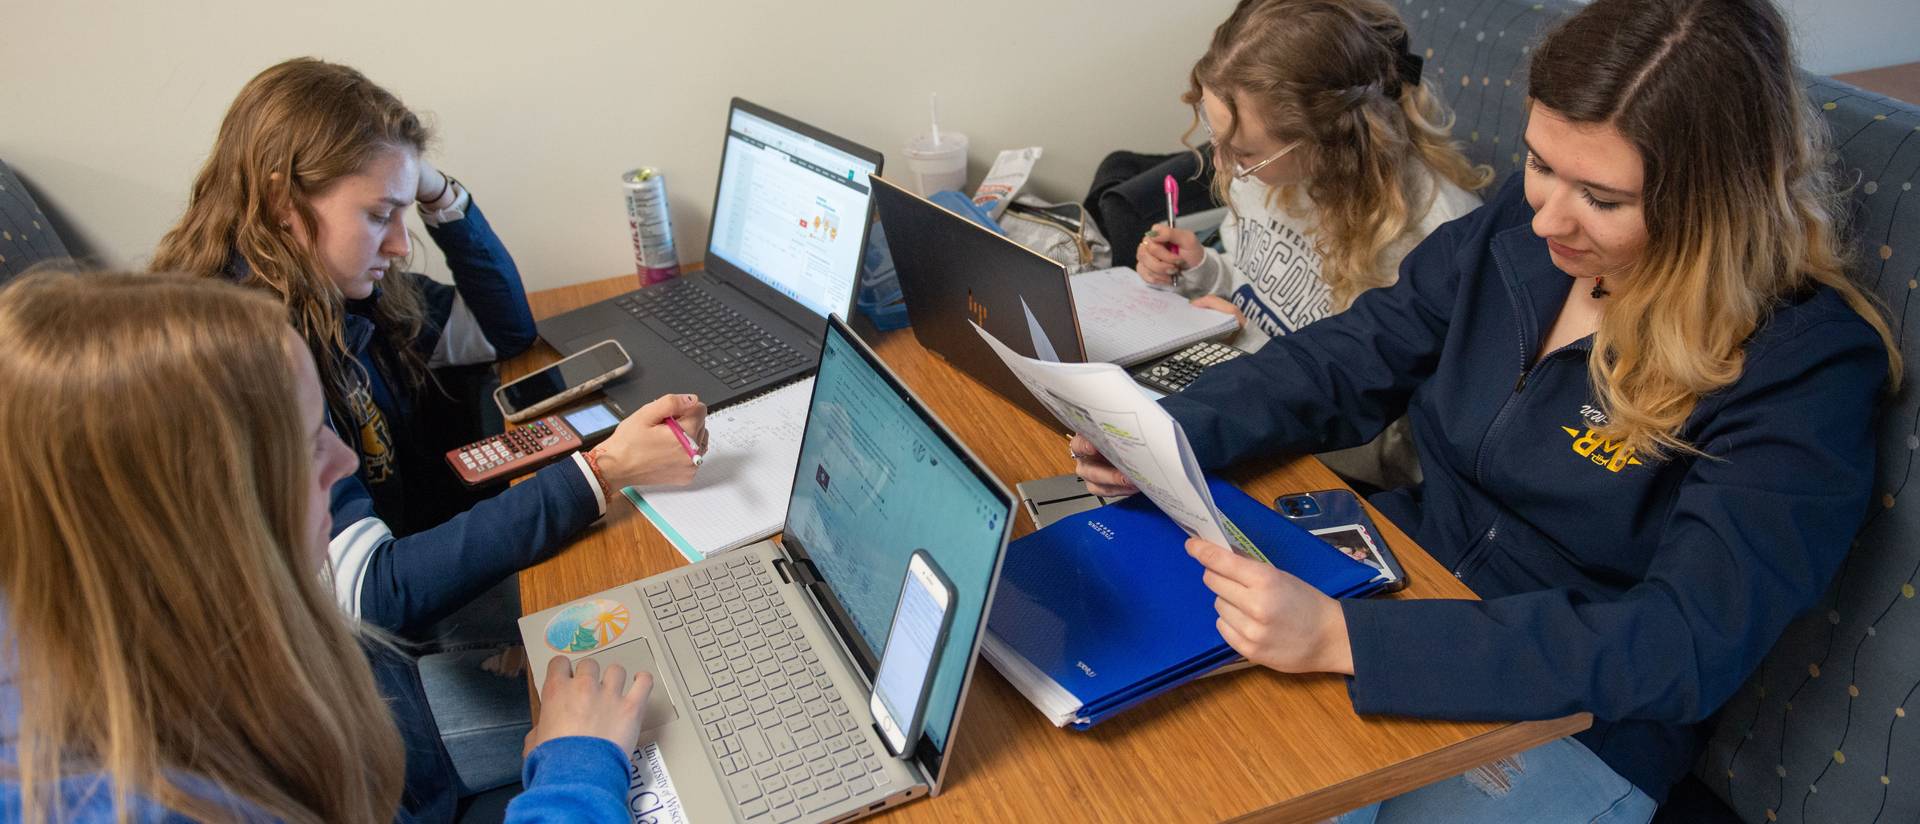 A group of four students share a booth and study on their laptops